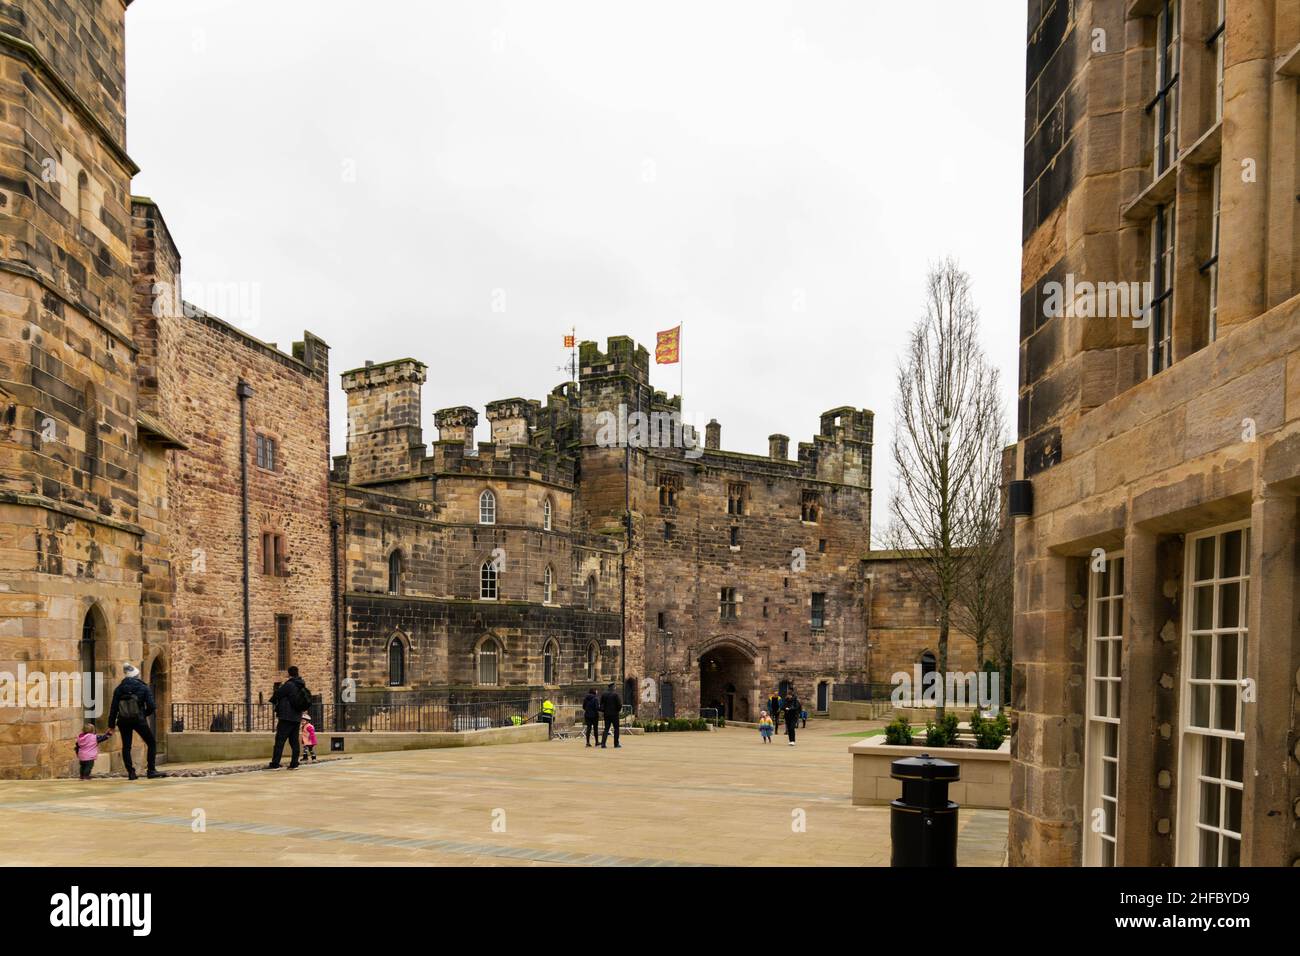 Lancaster, UK - 4th January 2020: Lancaster castle, a medieval roman fortress used as a prison during the English Civil war. Now a popular visited sit Stock Photo